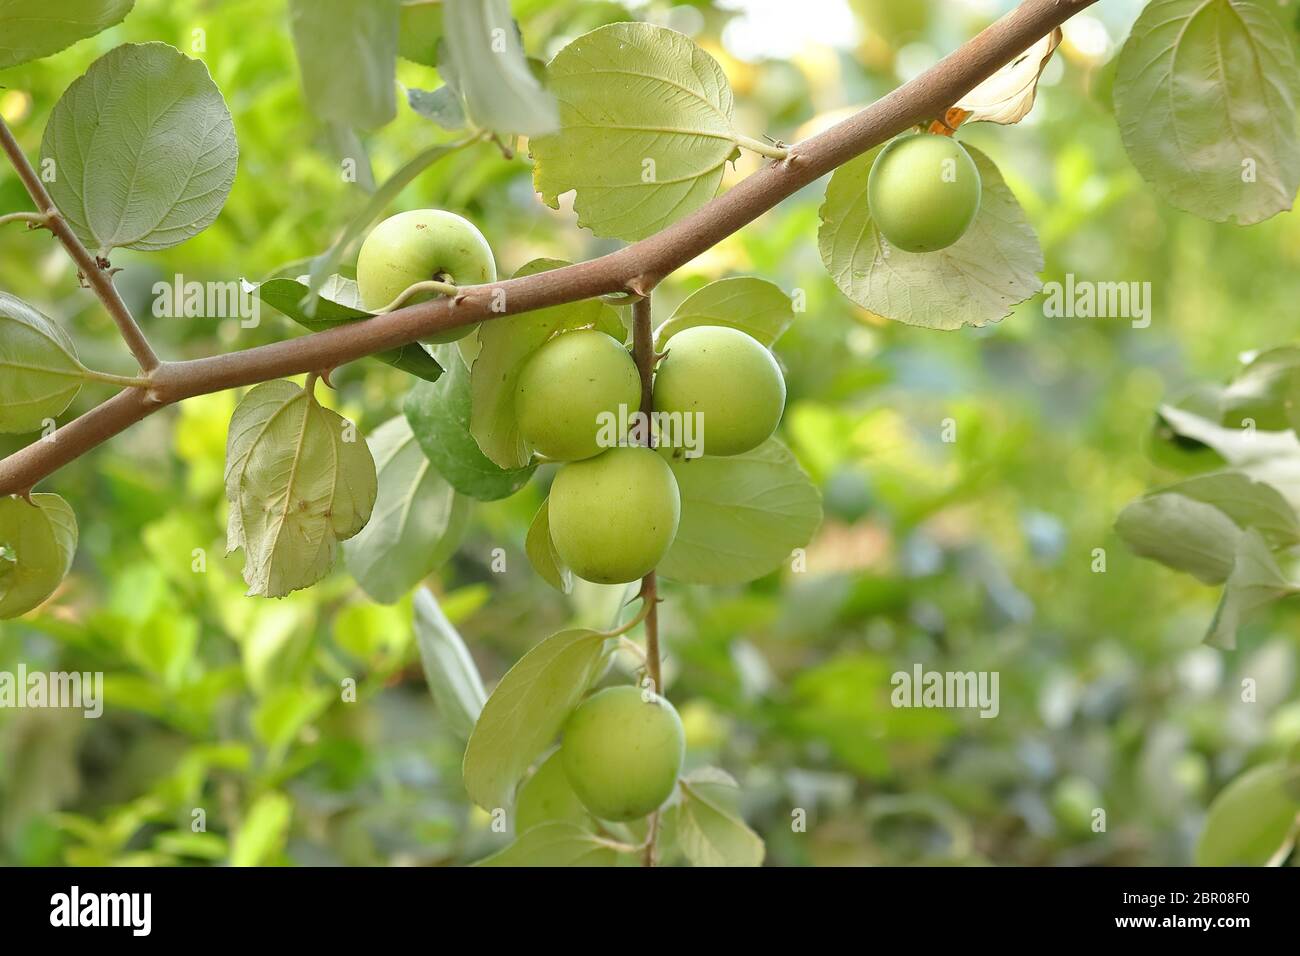 Ziziphus mauritiana, also known as Chinese date,Chinee apple, Indian plum, Indian jujube, ber fruit and dunks is a tropical fruit tree species belongi Stock Photo